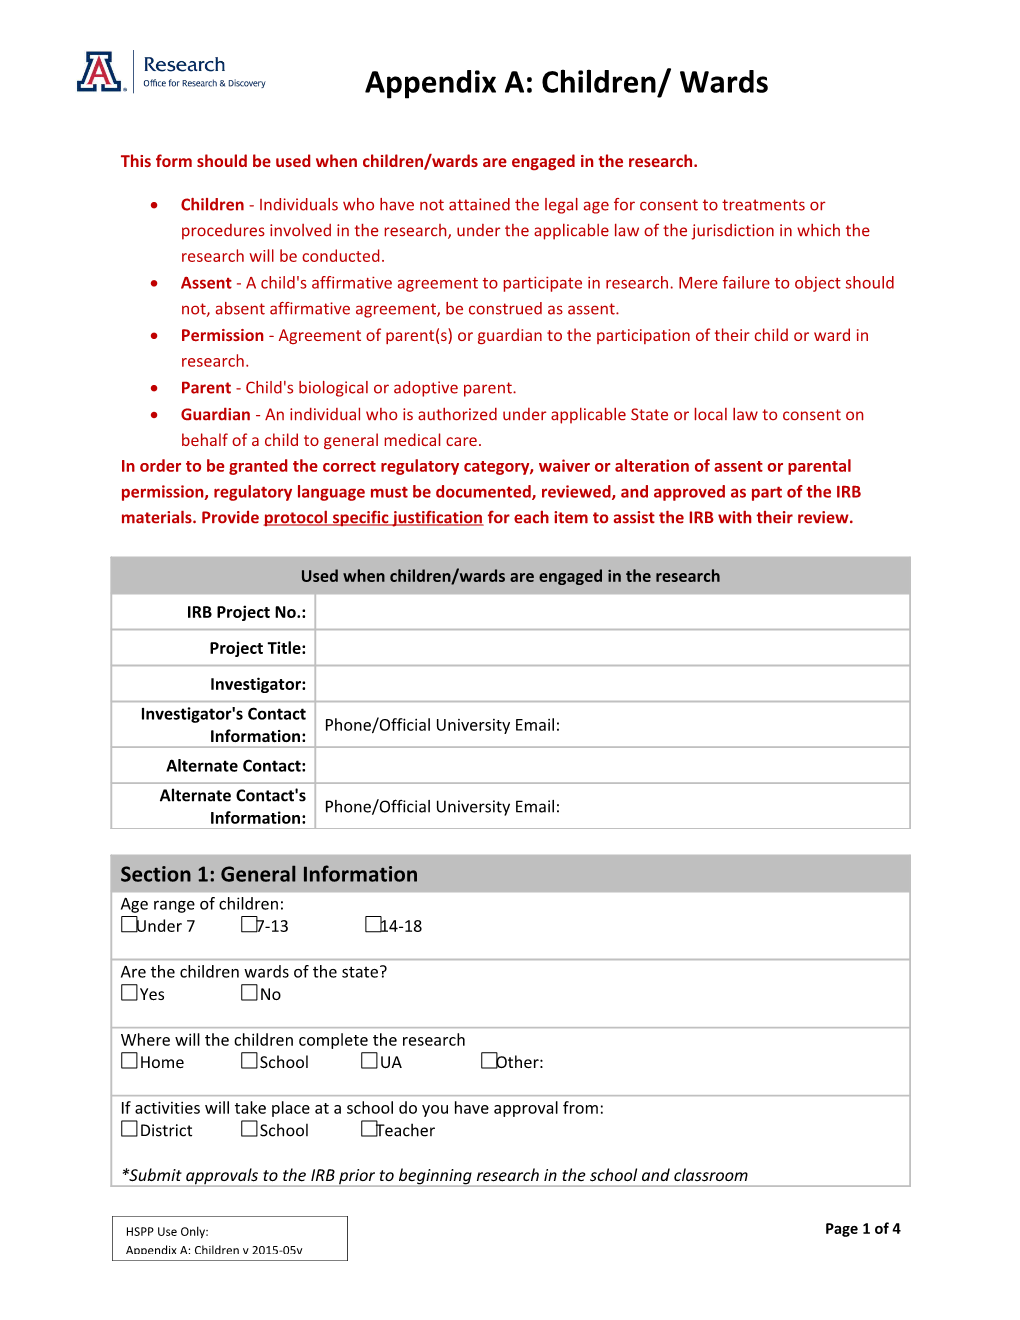 This Form Should Be Used When Children/Wards Are Engaged in the Research